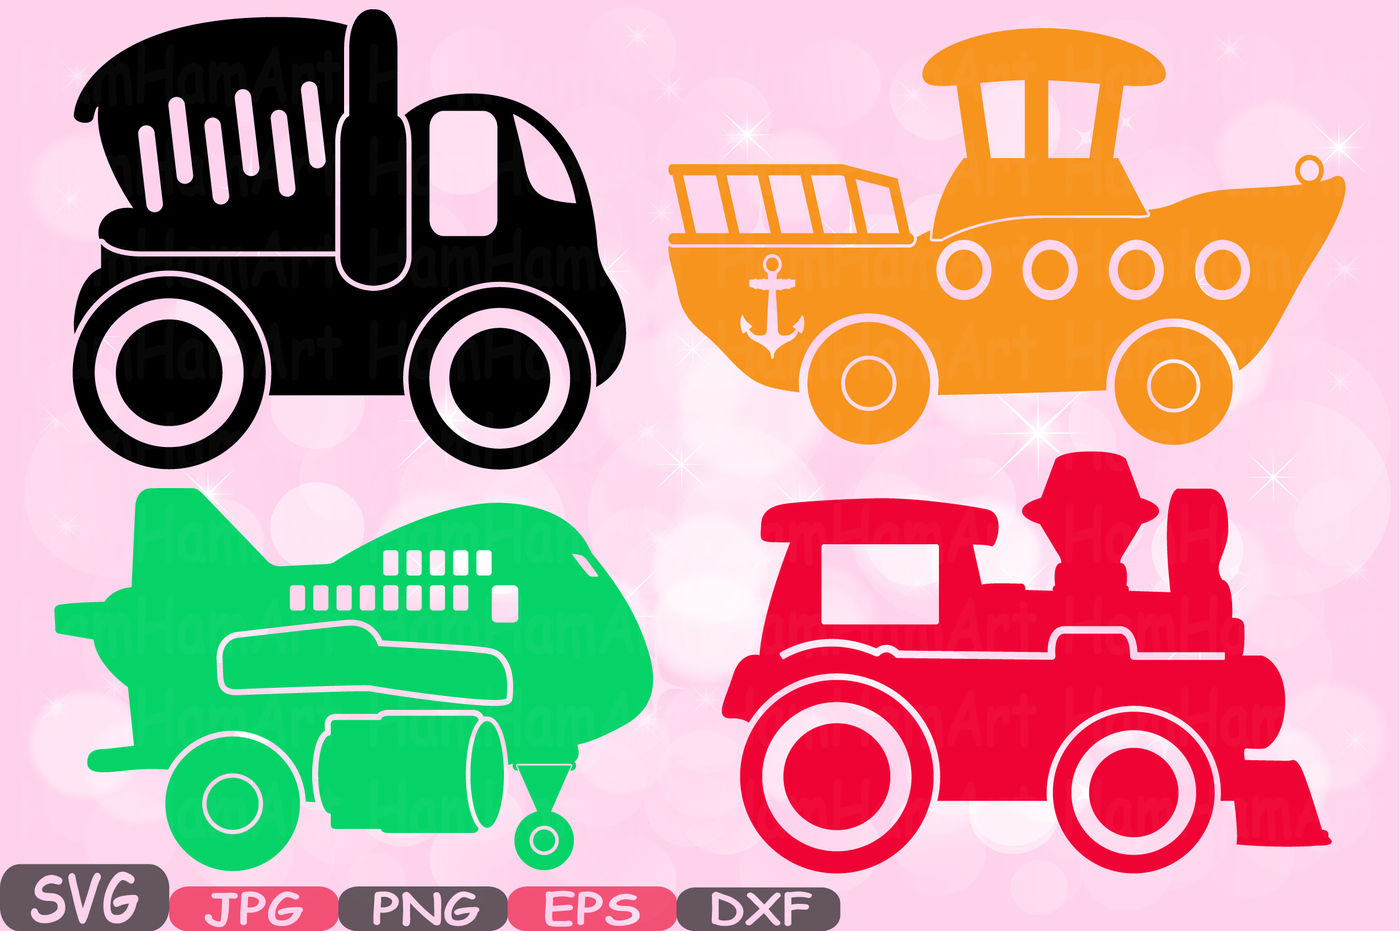 Download Toys Machine Silhouette Svg File Cutting Files Dump Trucks Wooden Toy Cars Airplane Boat Train Stickers School Clipart Dxf Cricut 644s By Hamhamart Thehungryjpeg Com